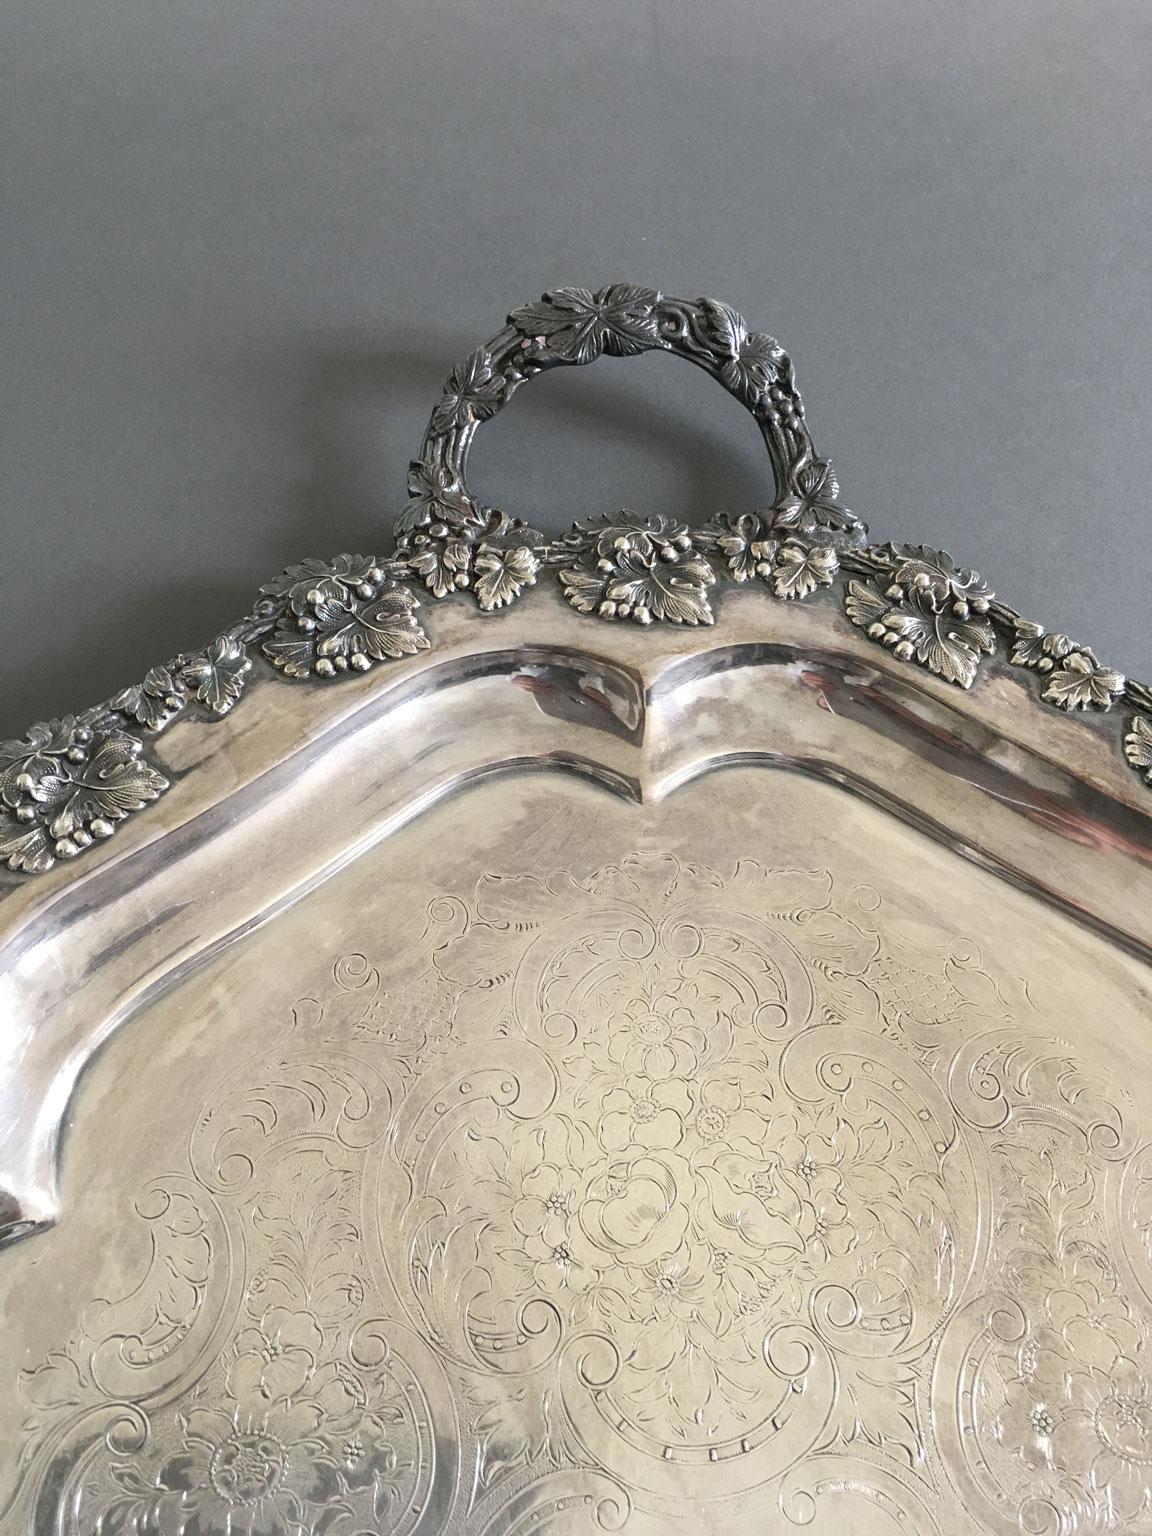 Hand-Crafted Mid-19th Century Oval Engraved Sheffield Tray with Handles For Sale